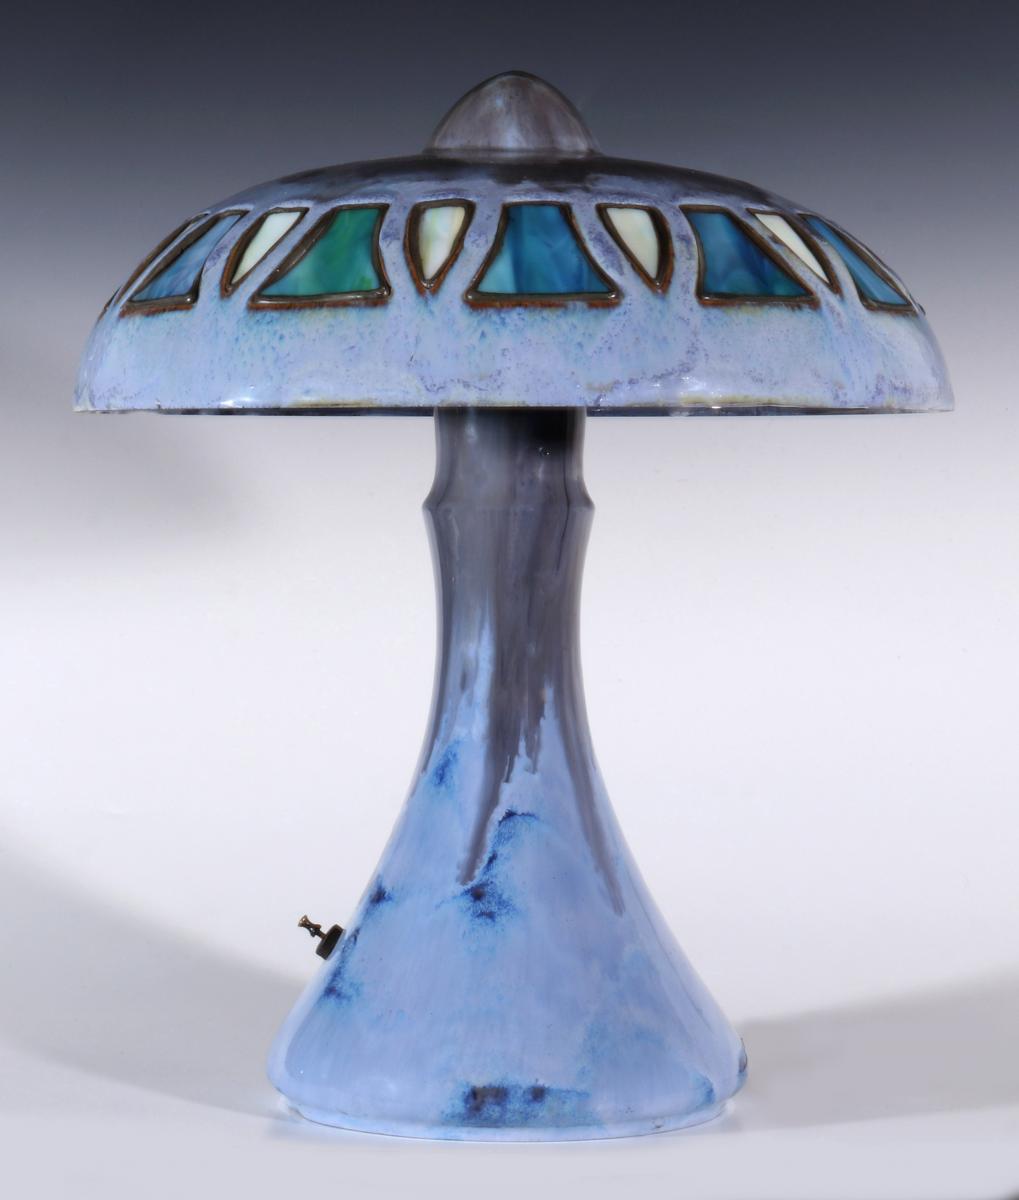 A FULPER ART POTTERY TABLE LAMP WITH LEADED GLASS